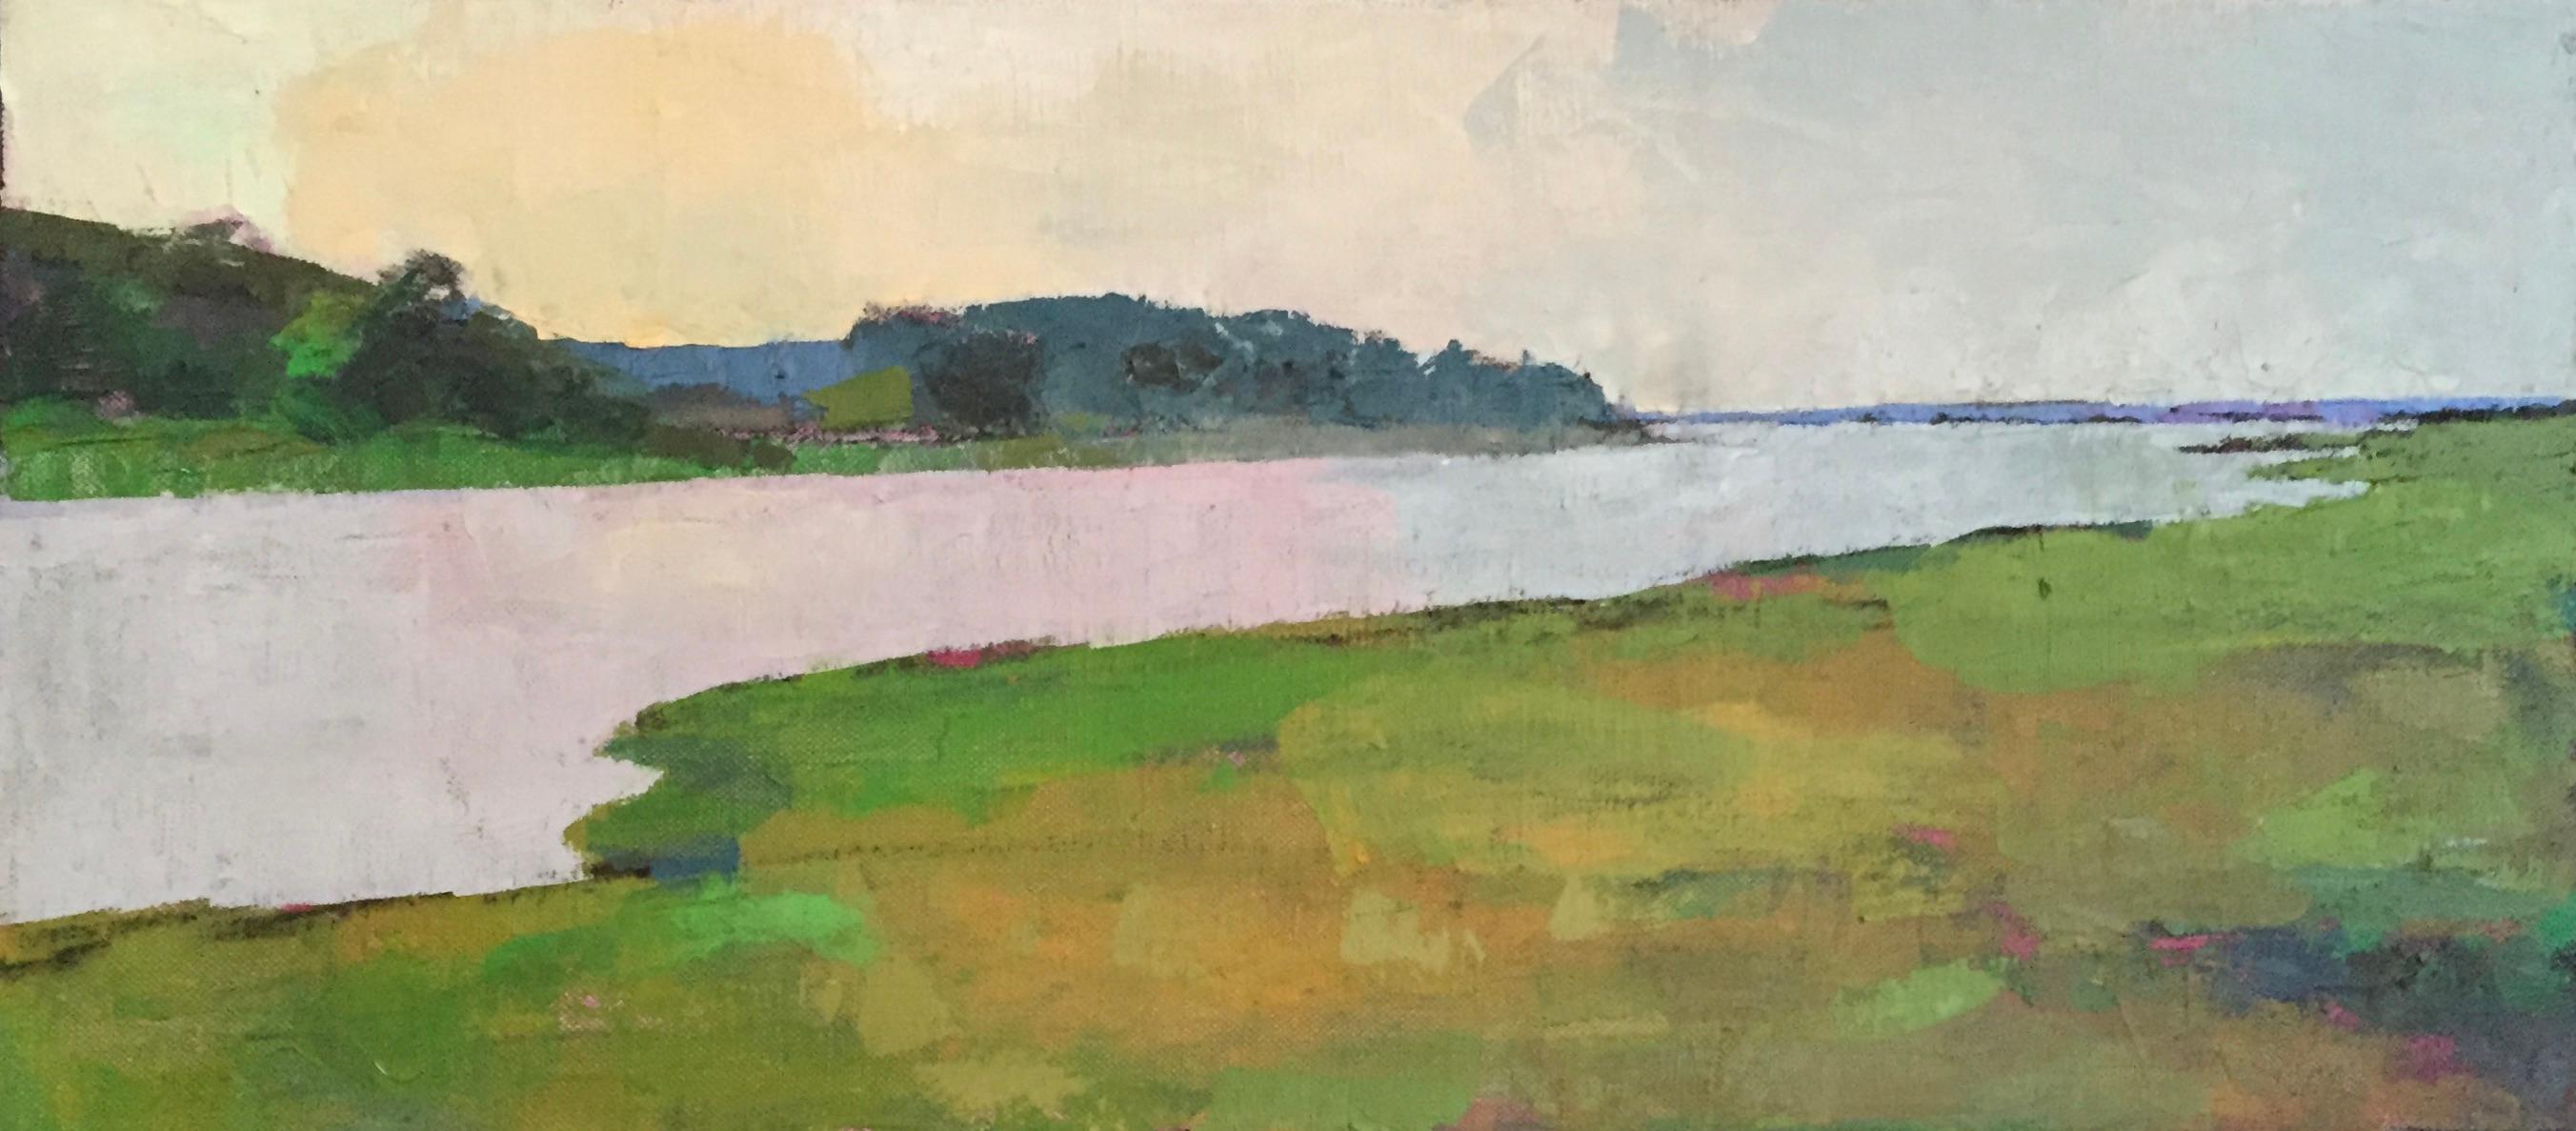 Larry Horowitz Landscape Painting - "Chappy Marsh" oil painting of green grasses and water on Martha's Vineyard